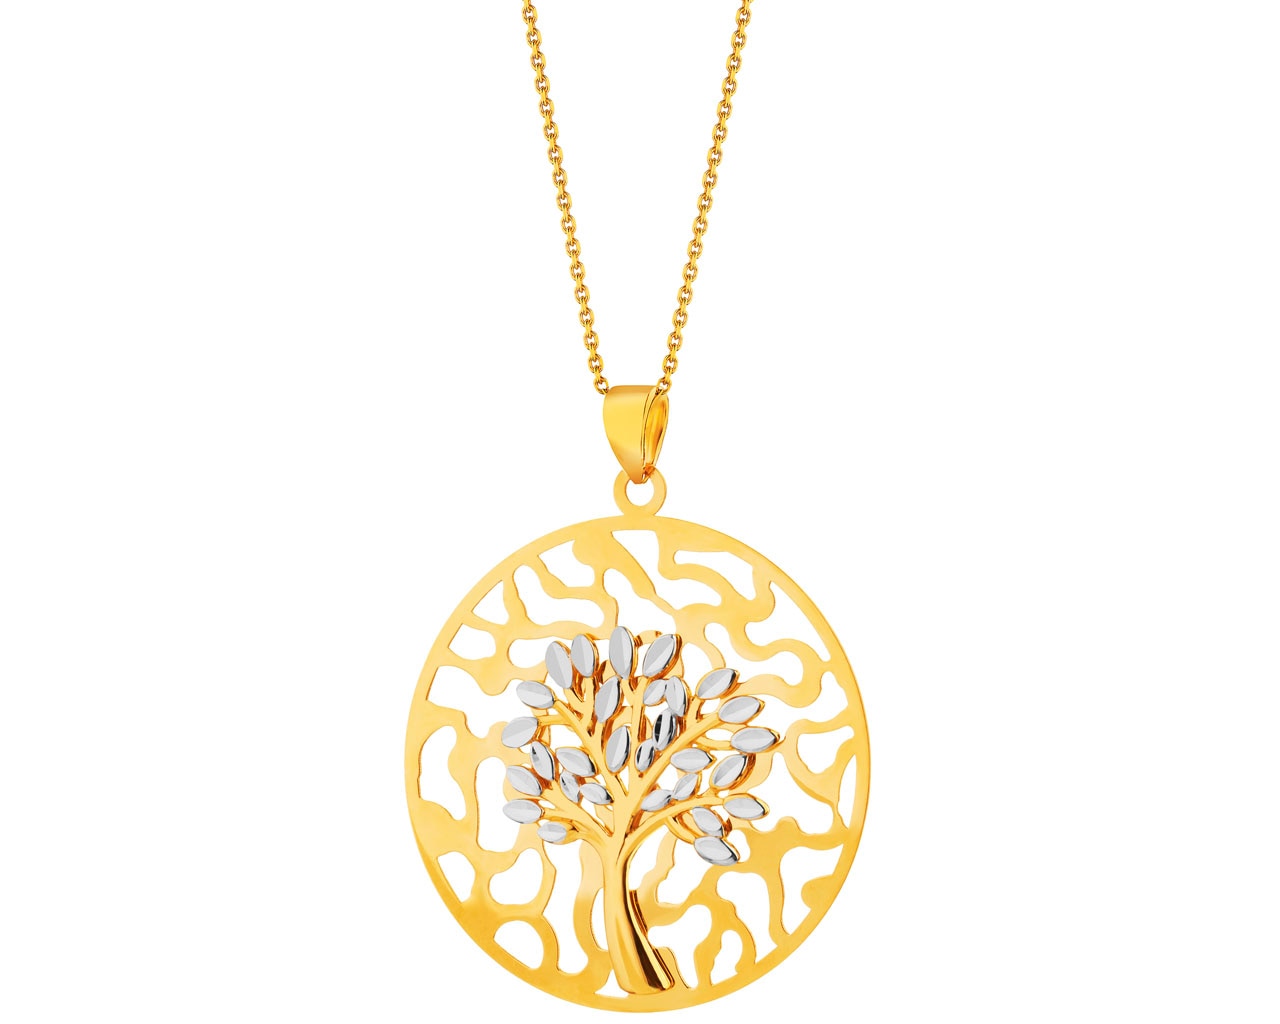 9Ct Yellow Gold Extra Large 38Mm Dome Locket | Womens H.Samuel Necklaces ·  Kristen Zak